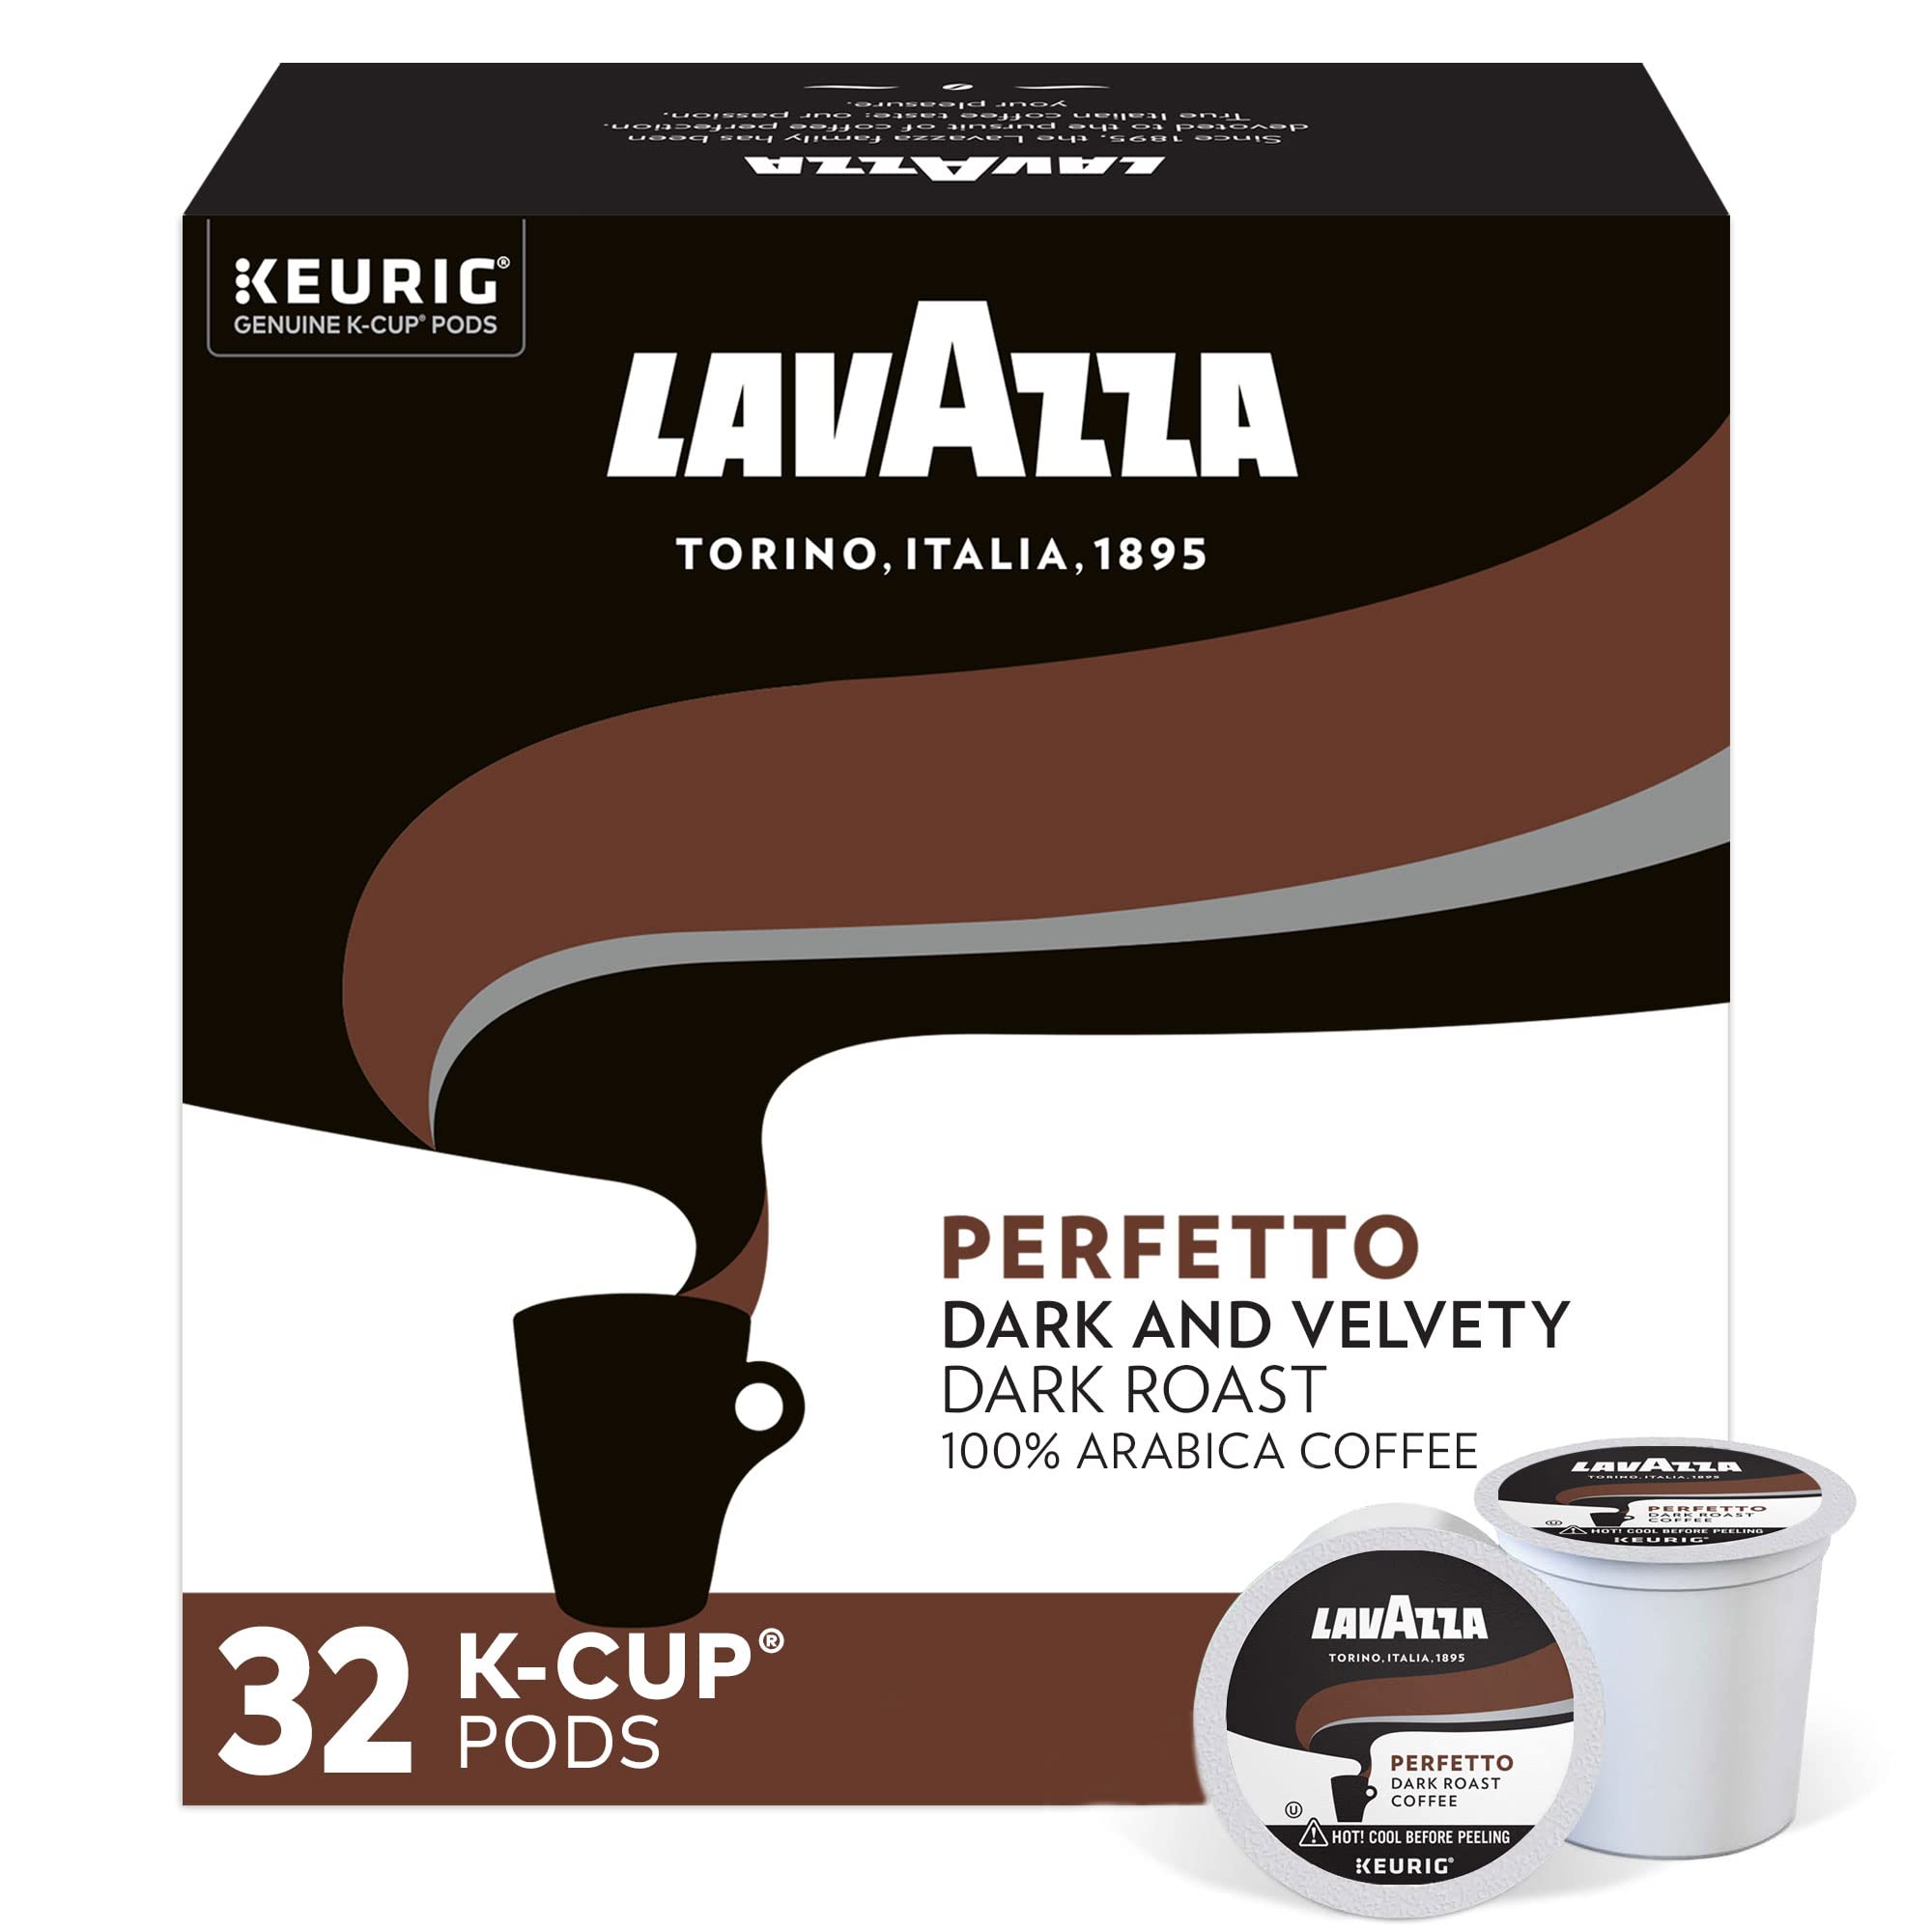 $13.73 /w S&S: Lavazza Perfetto Single-Serve Coffee K-Cup® Pods for Keurig® Brewer, 32 Count